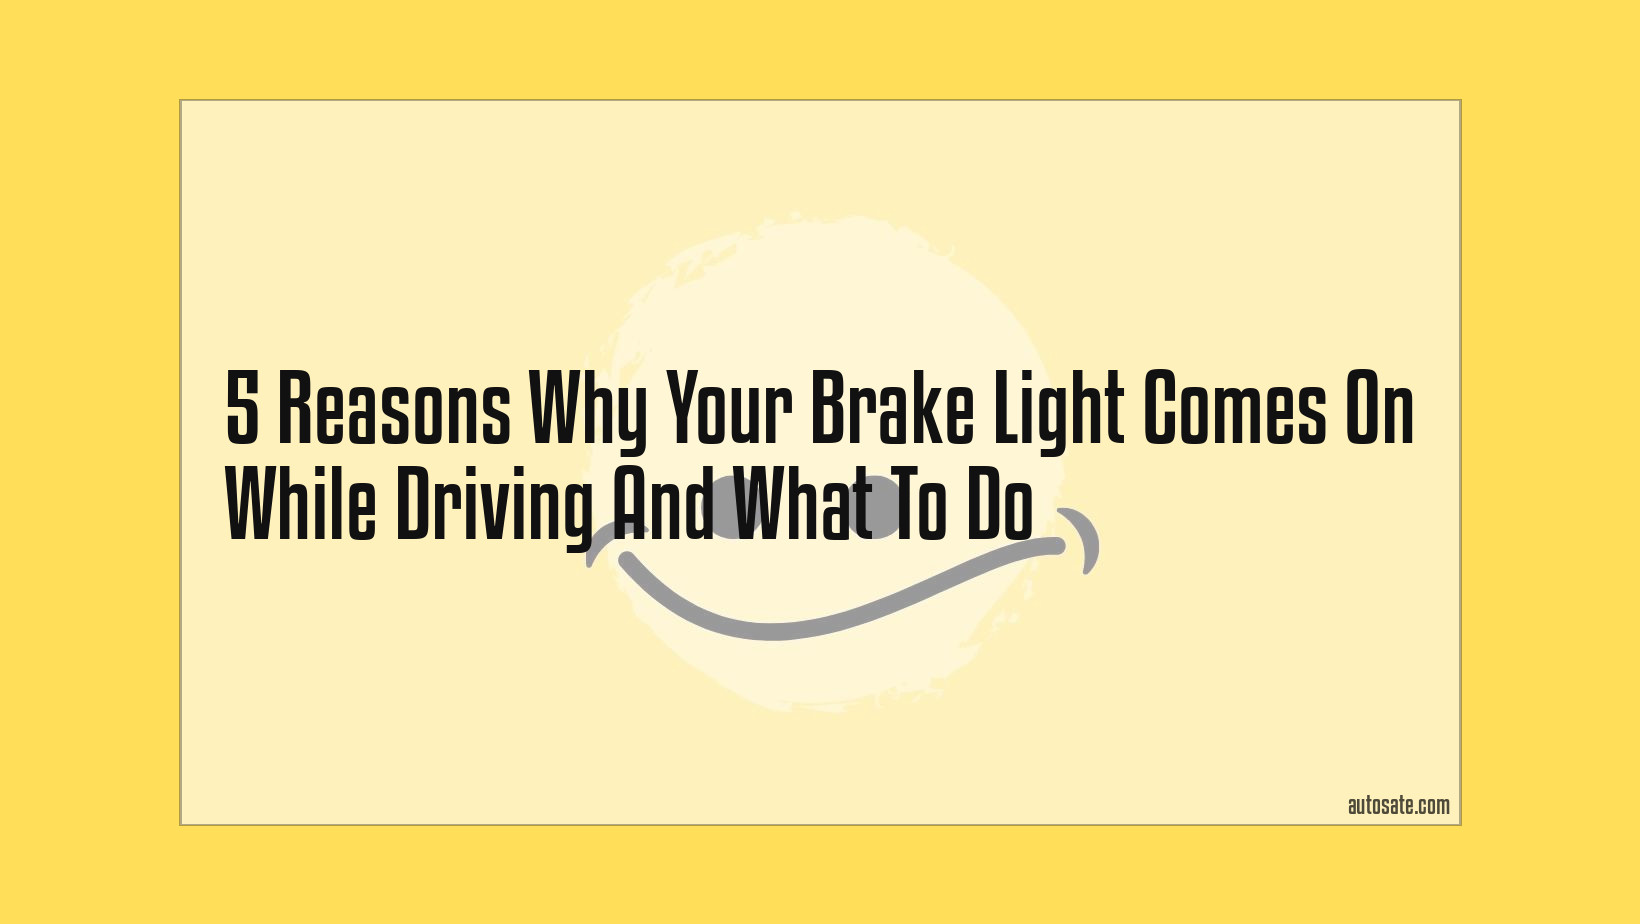 5 Reasons Why Your Brake Light Comes On While Driving And What To Do